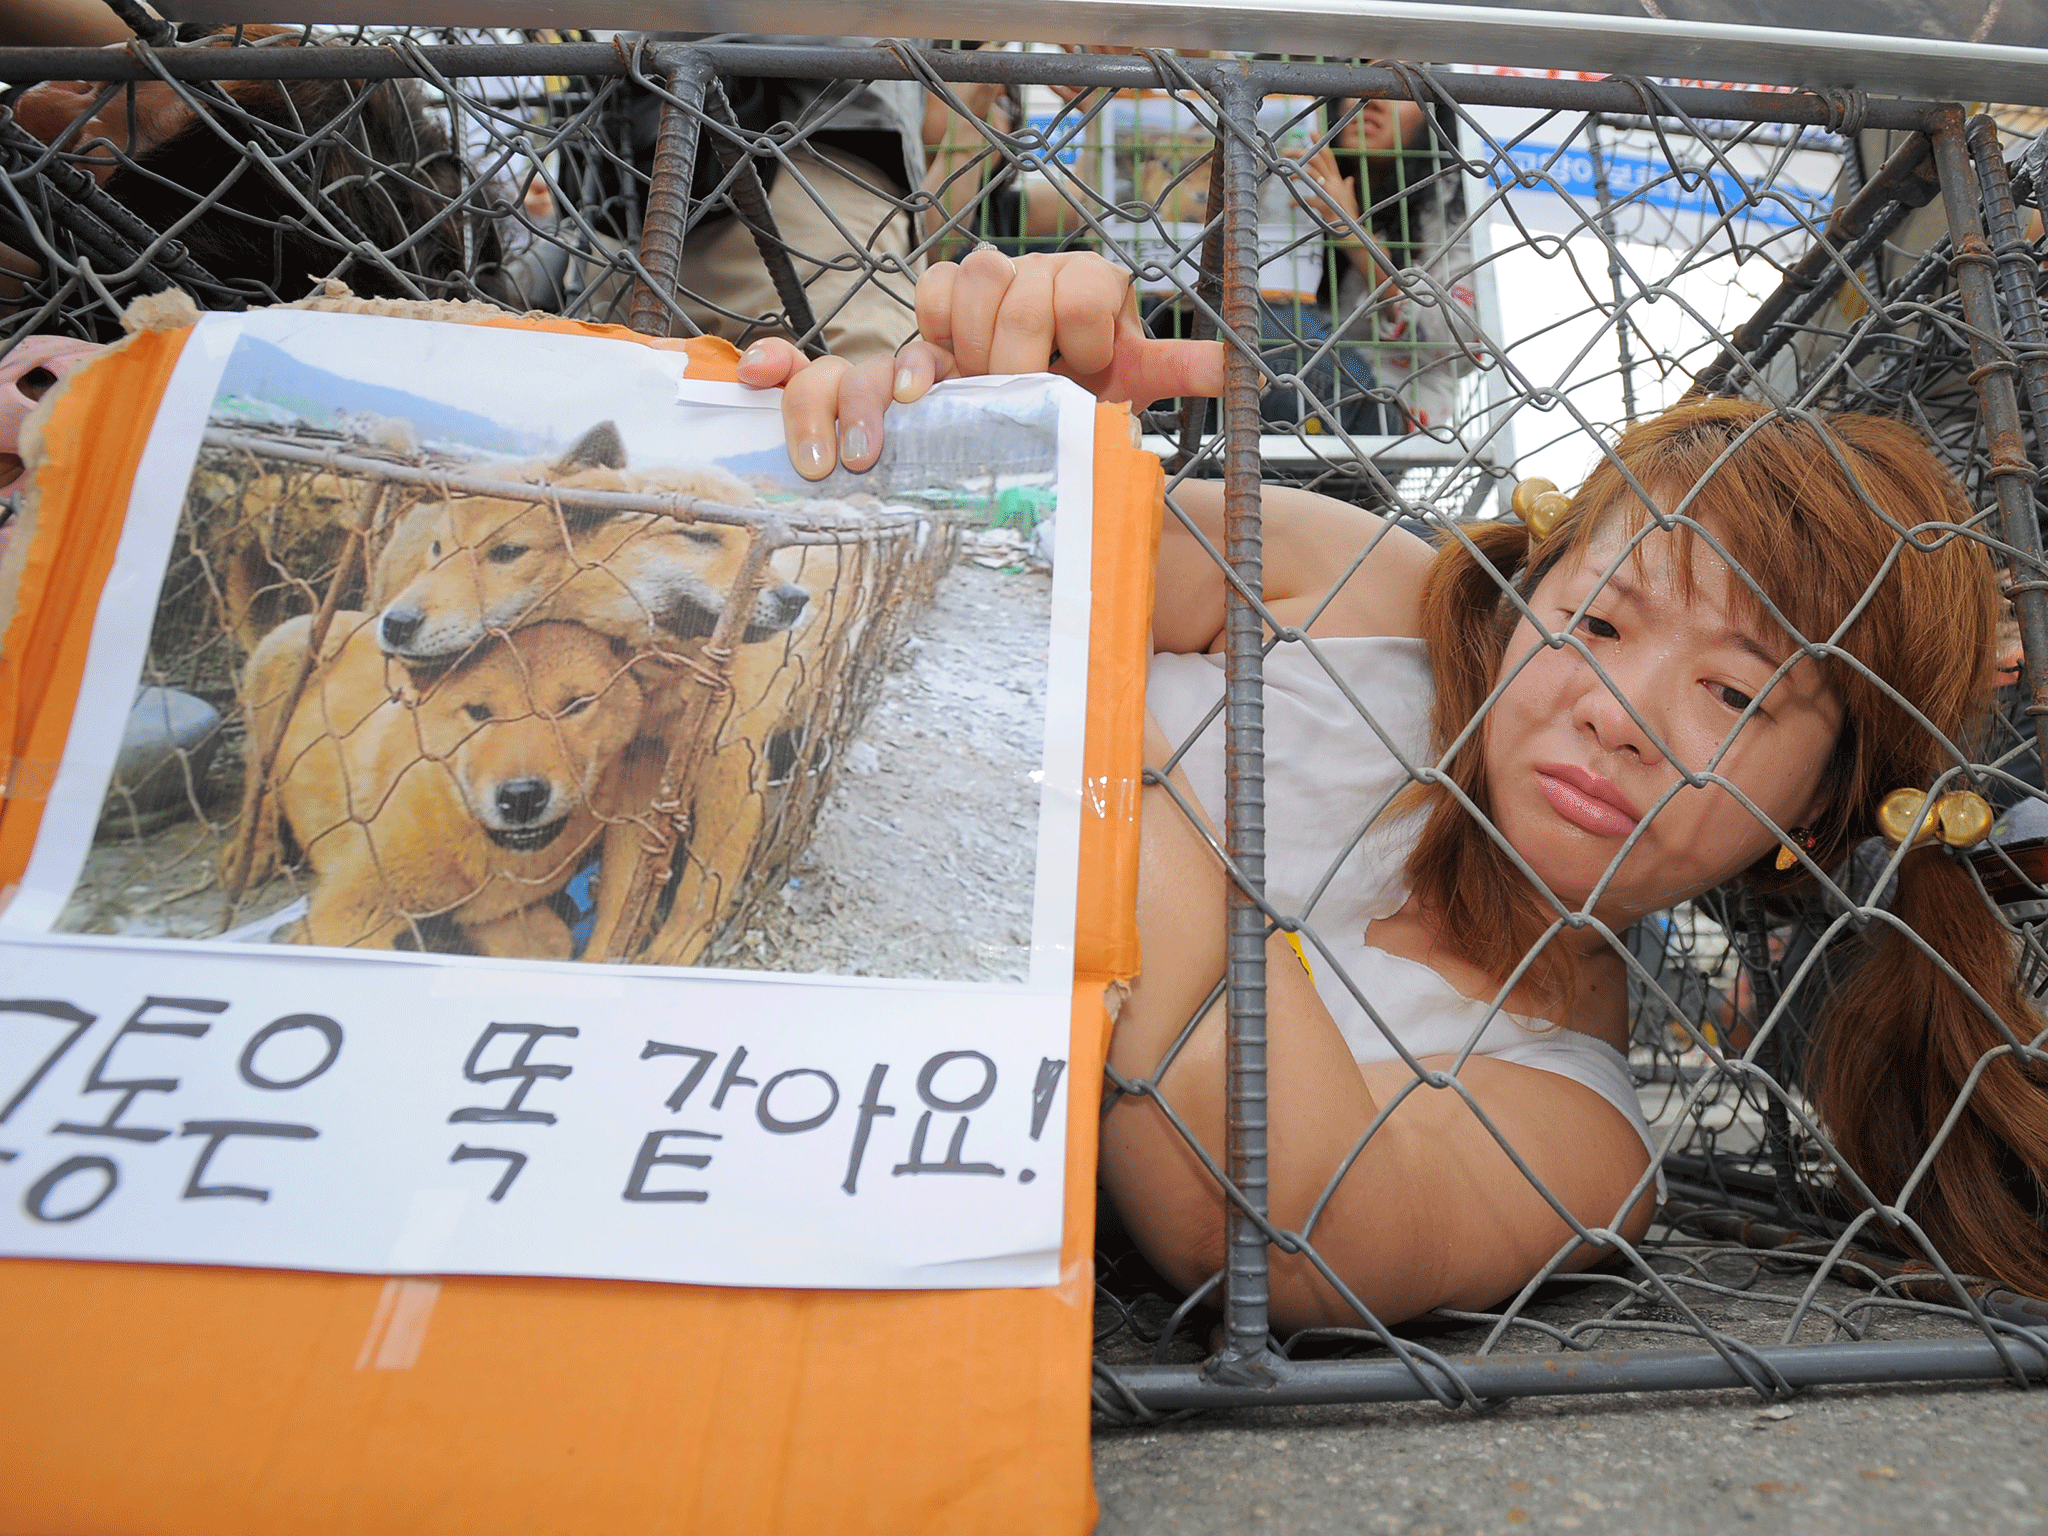 Animal rights protestors demonstrate close to the market in Seongnam